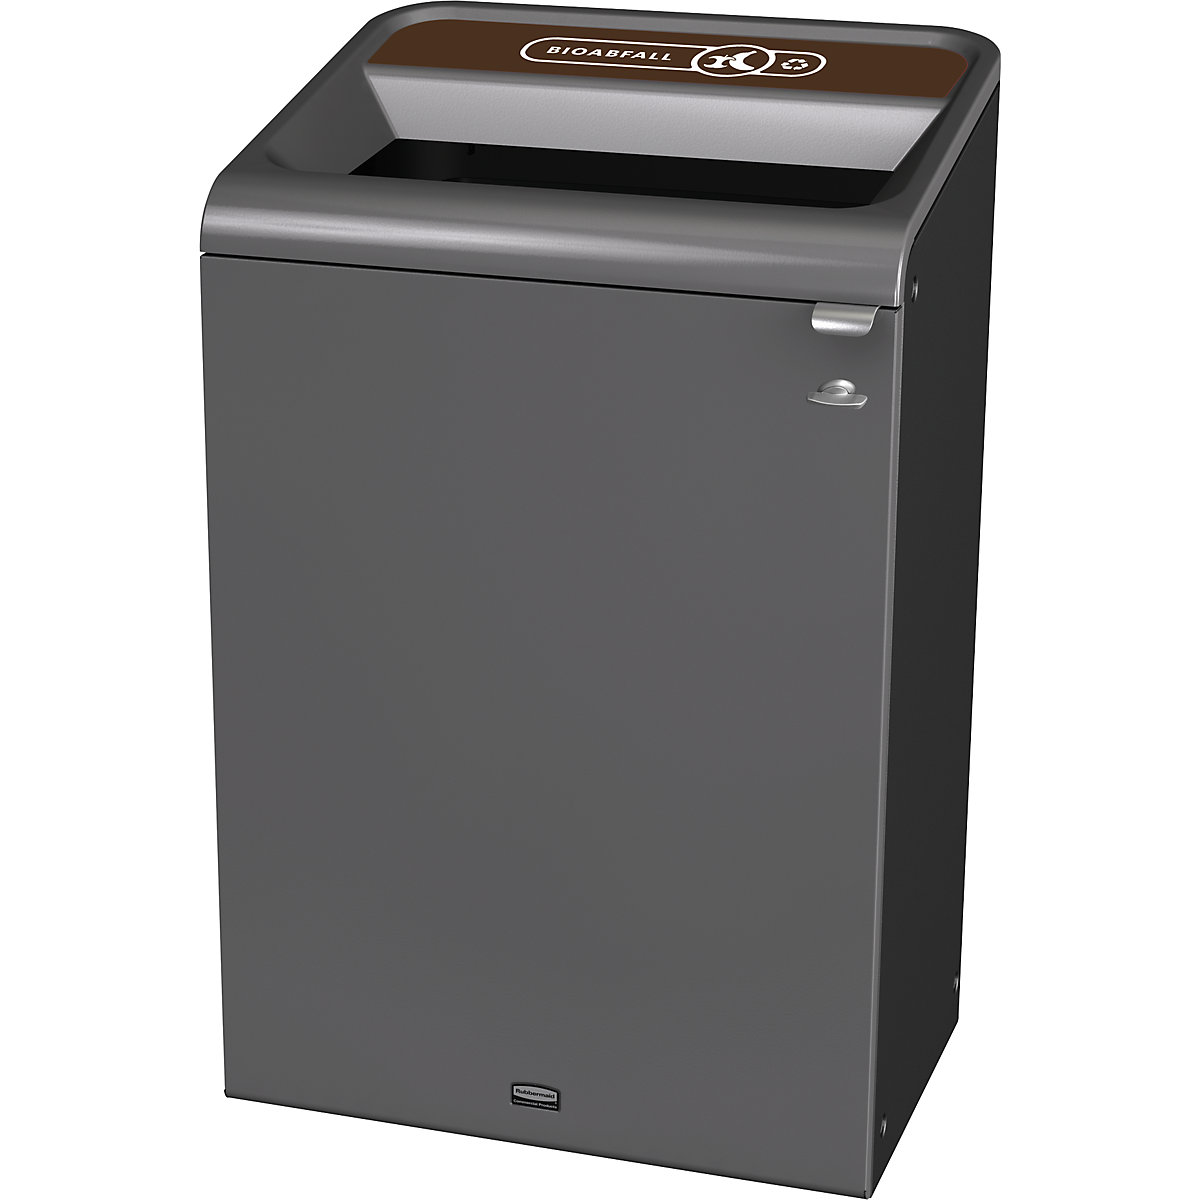 Configure™ recyclable waste collector - Rubbermaid